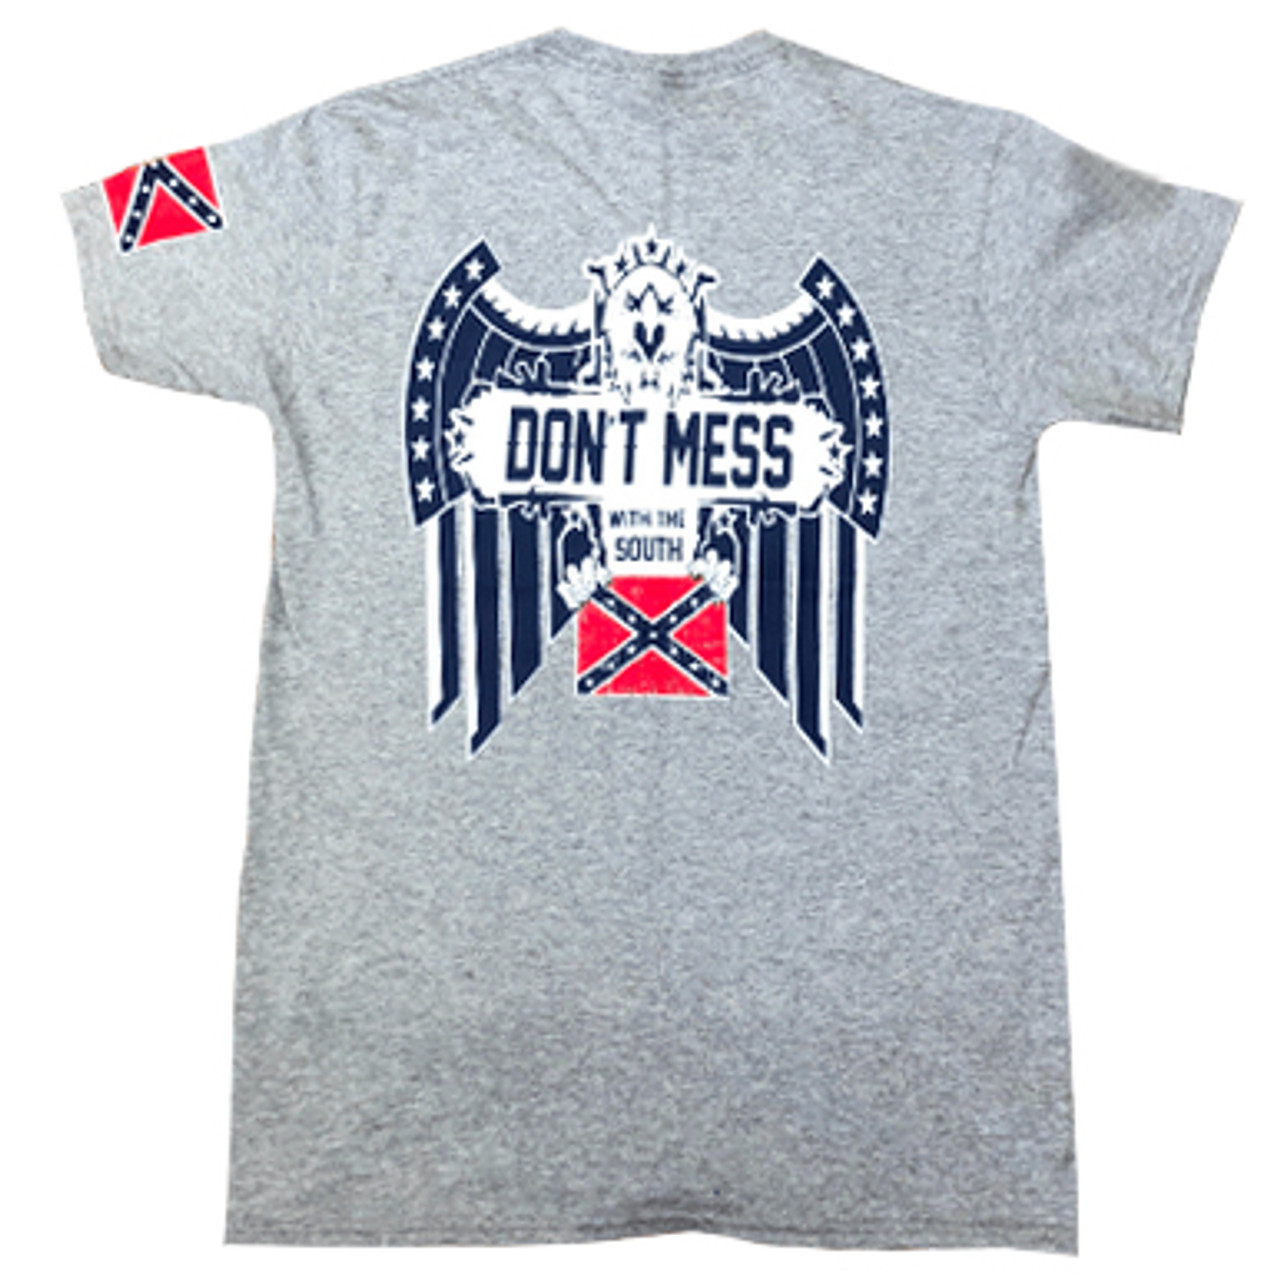 Don't mess with the south confederate flag t-shirt